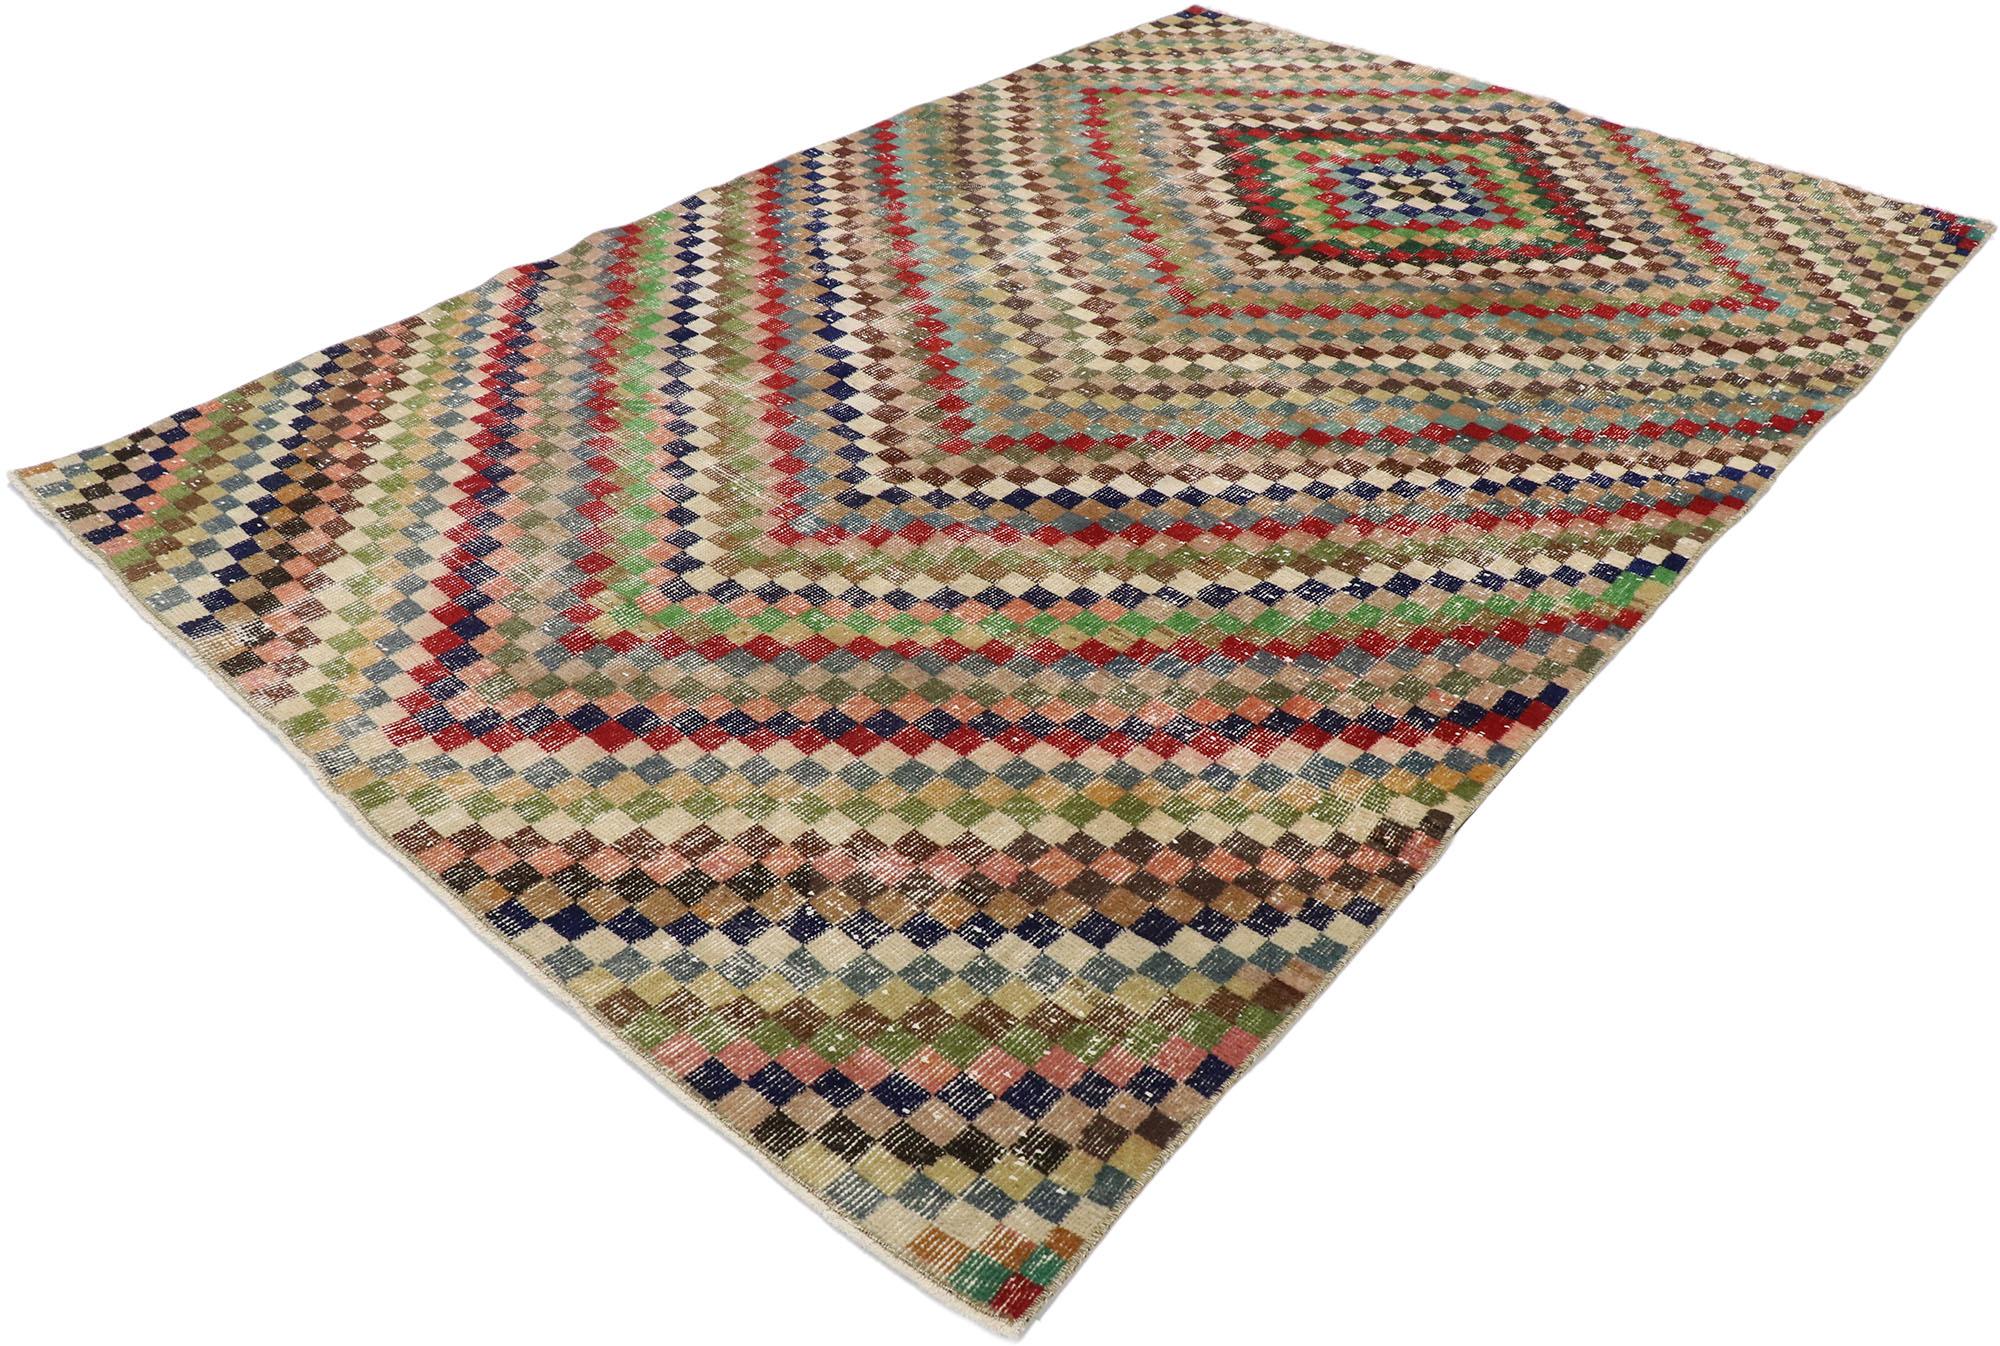 53308, distressed vintage Turkish Sivas rug with Rustic Mid-Century Modern Cubist style. This hand knotted wool distressed vintage Turkish Sivas rug features an all-over checkered asymmetrical diamond chevron pattern comprised of rows of